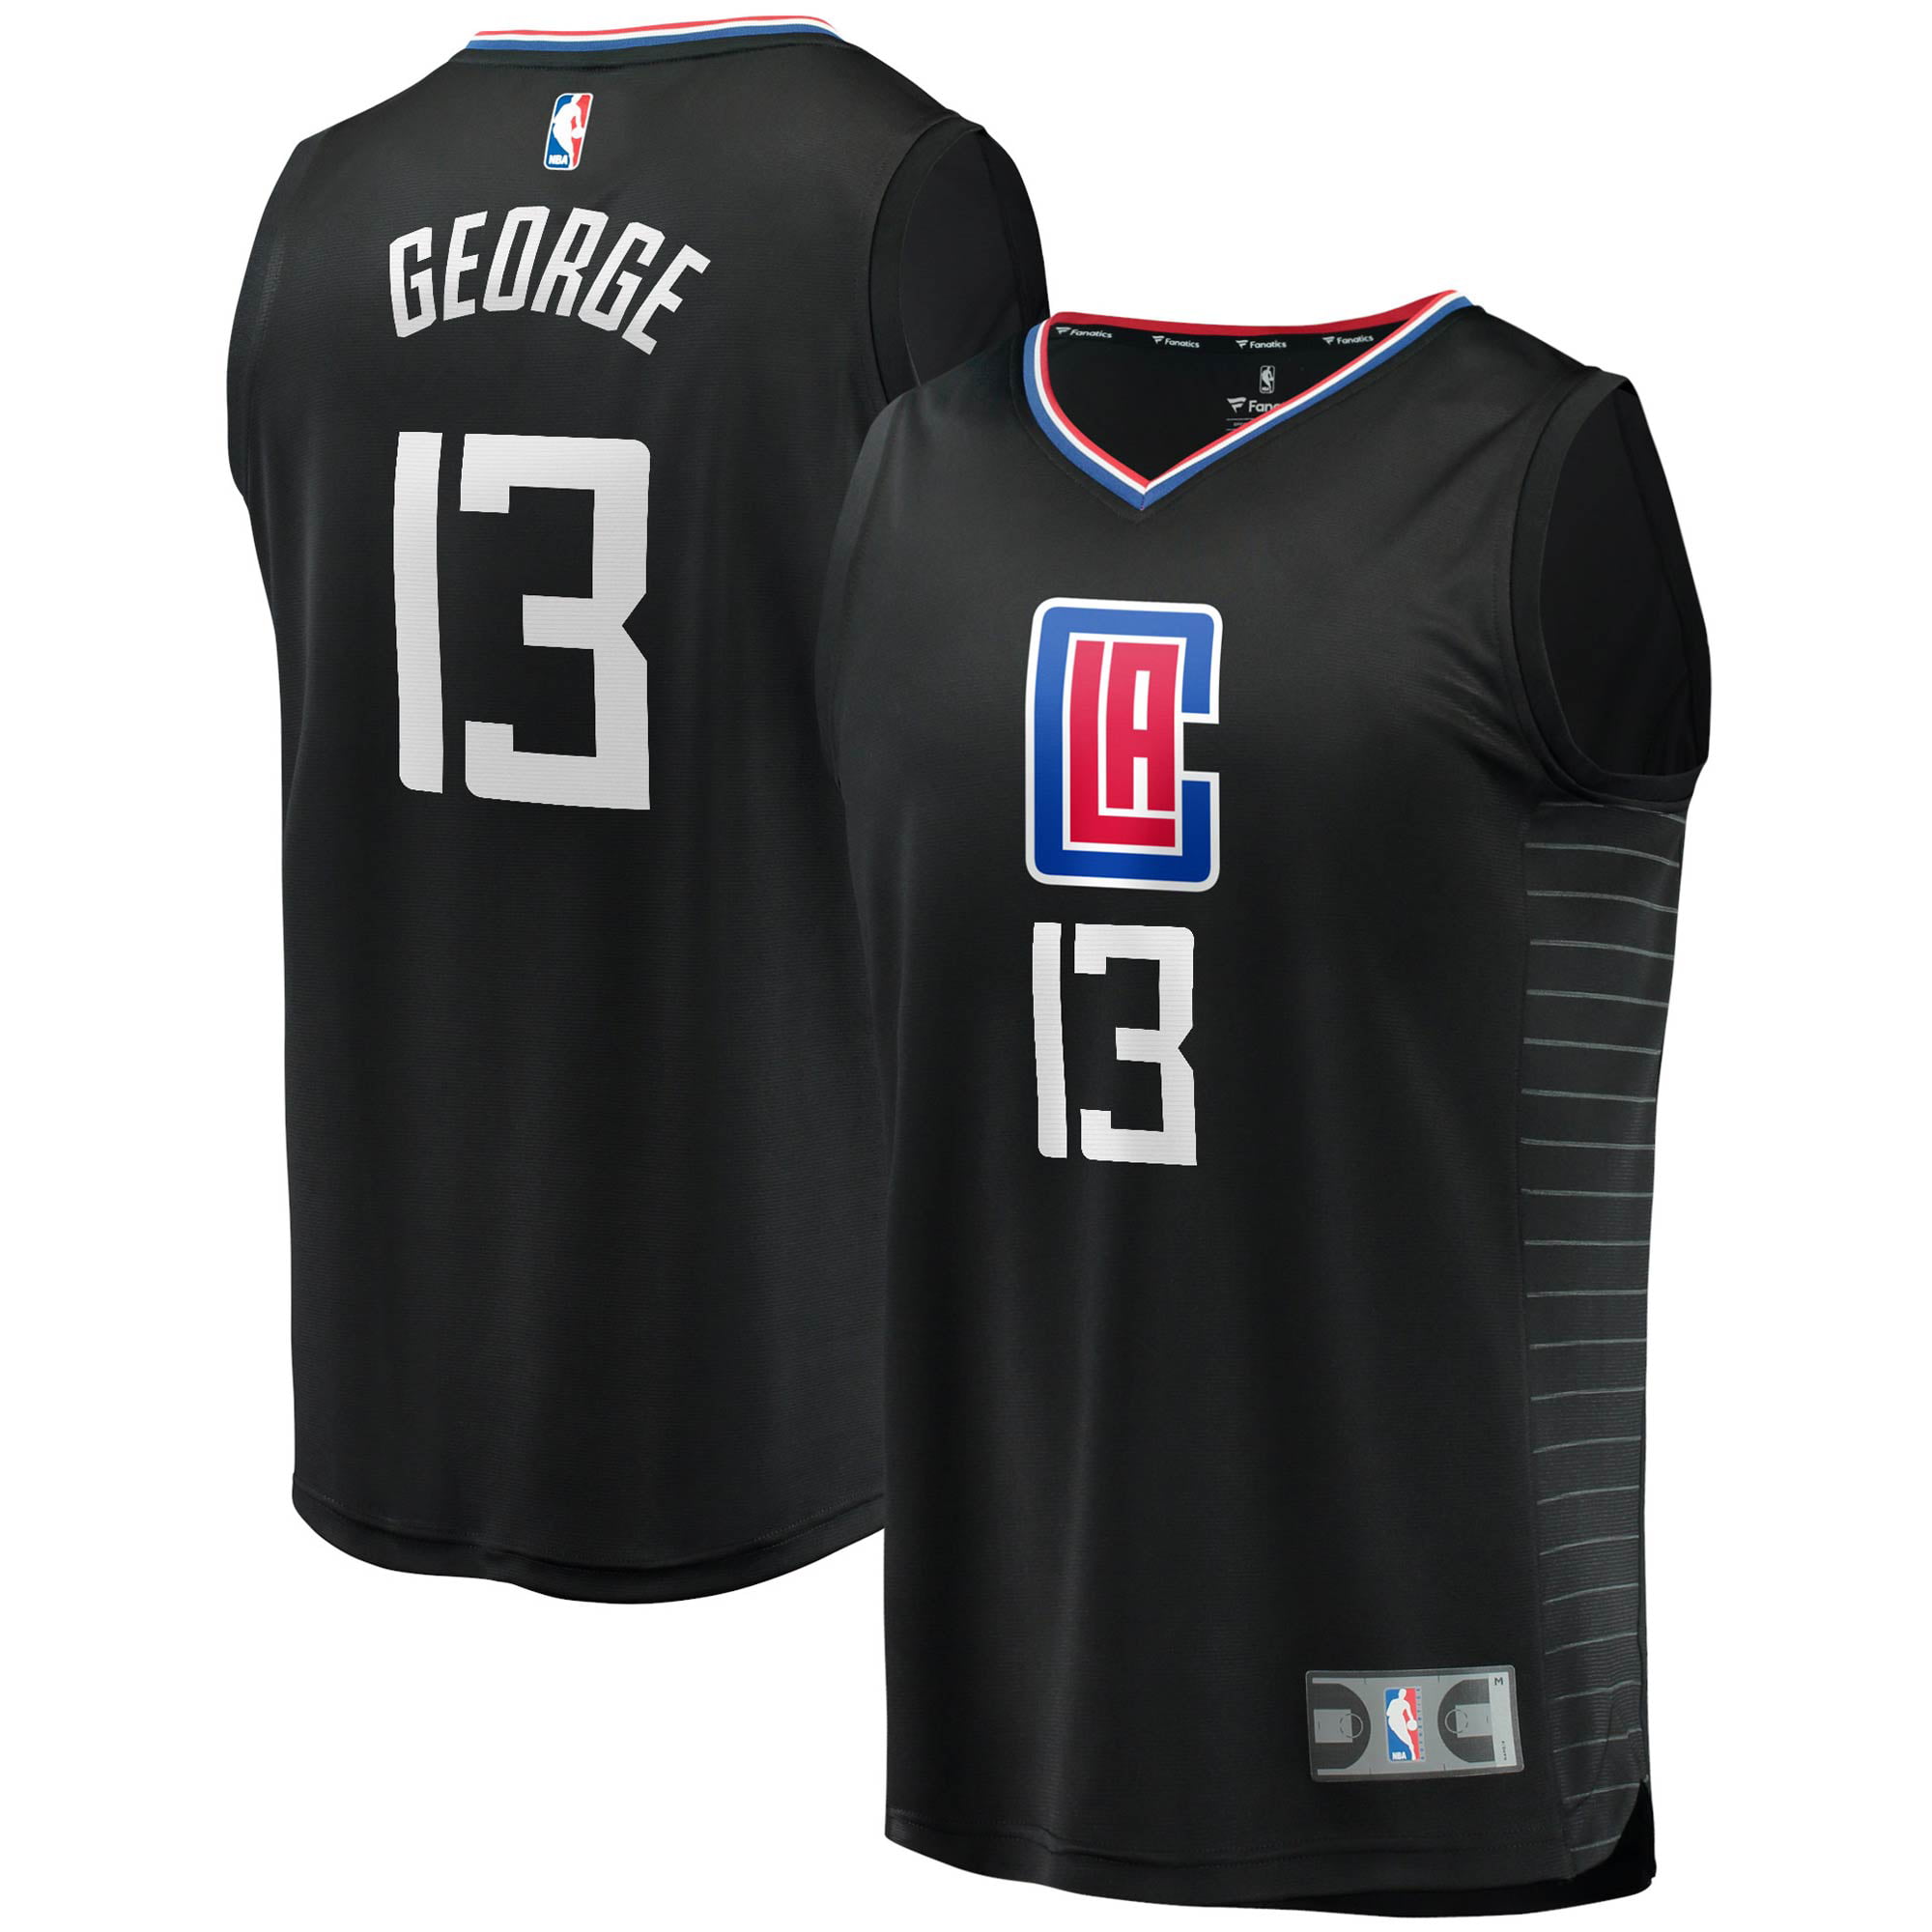 2020 clippers jersey